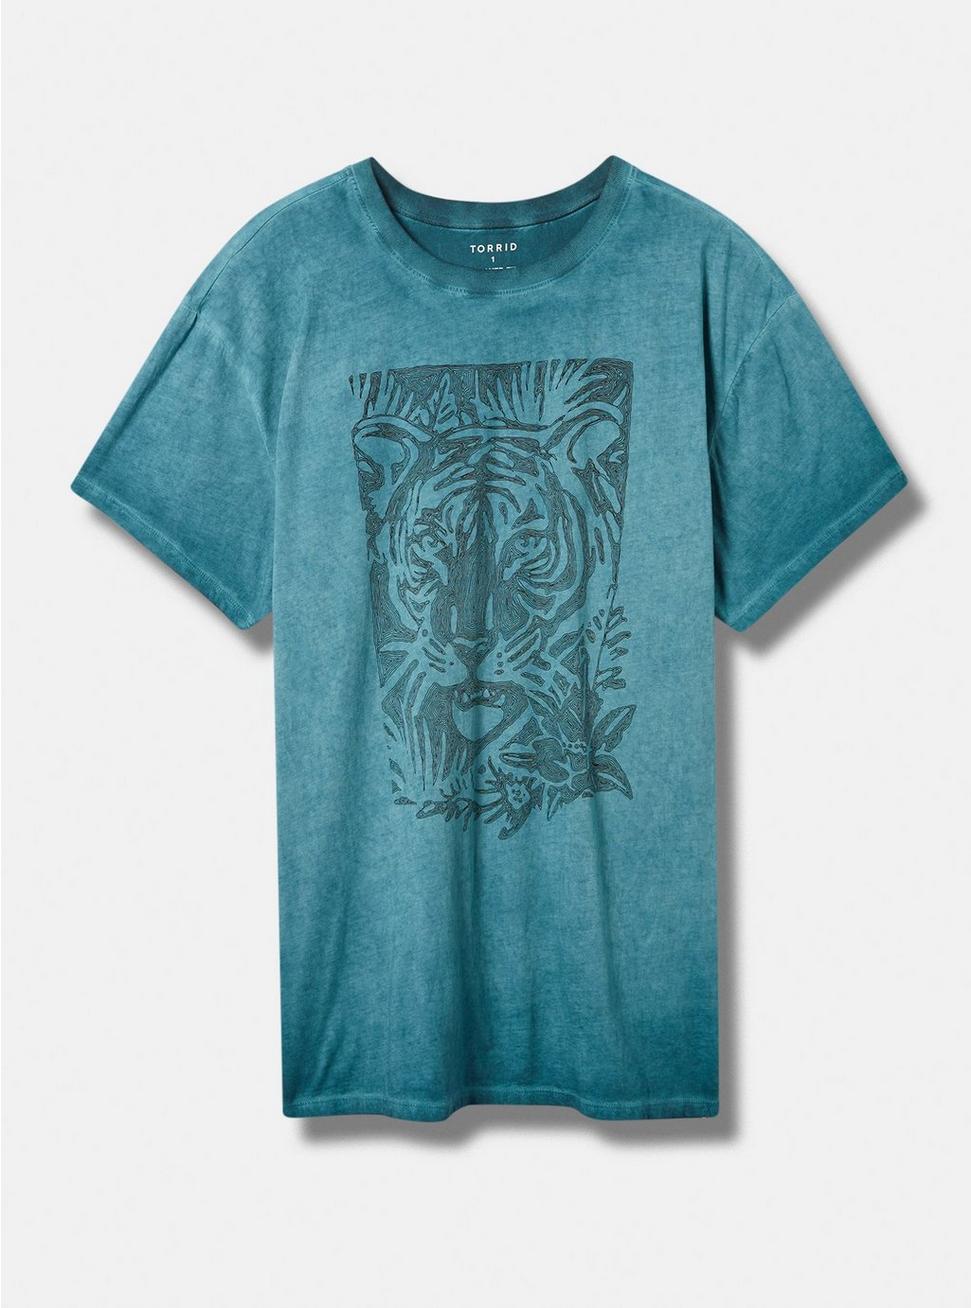 Tiger Relaxed Fit Cotton Jersey Destructed Drop Shoulder Tunic, DEEP TEAL, hi-res